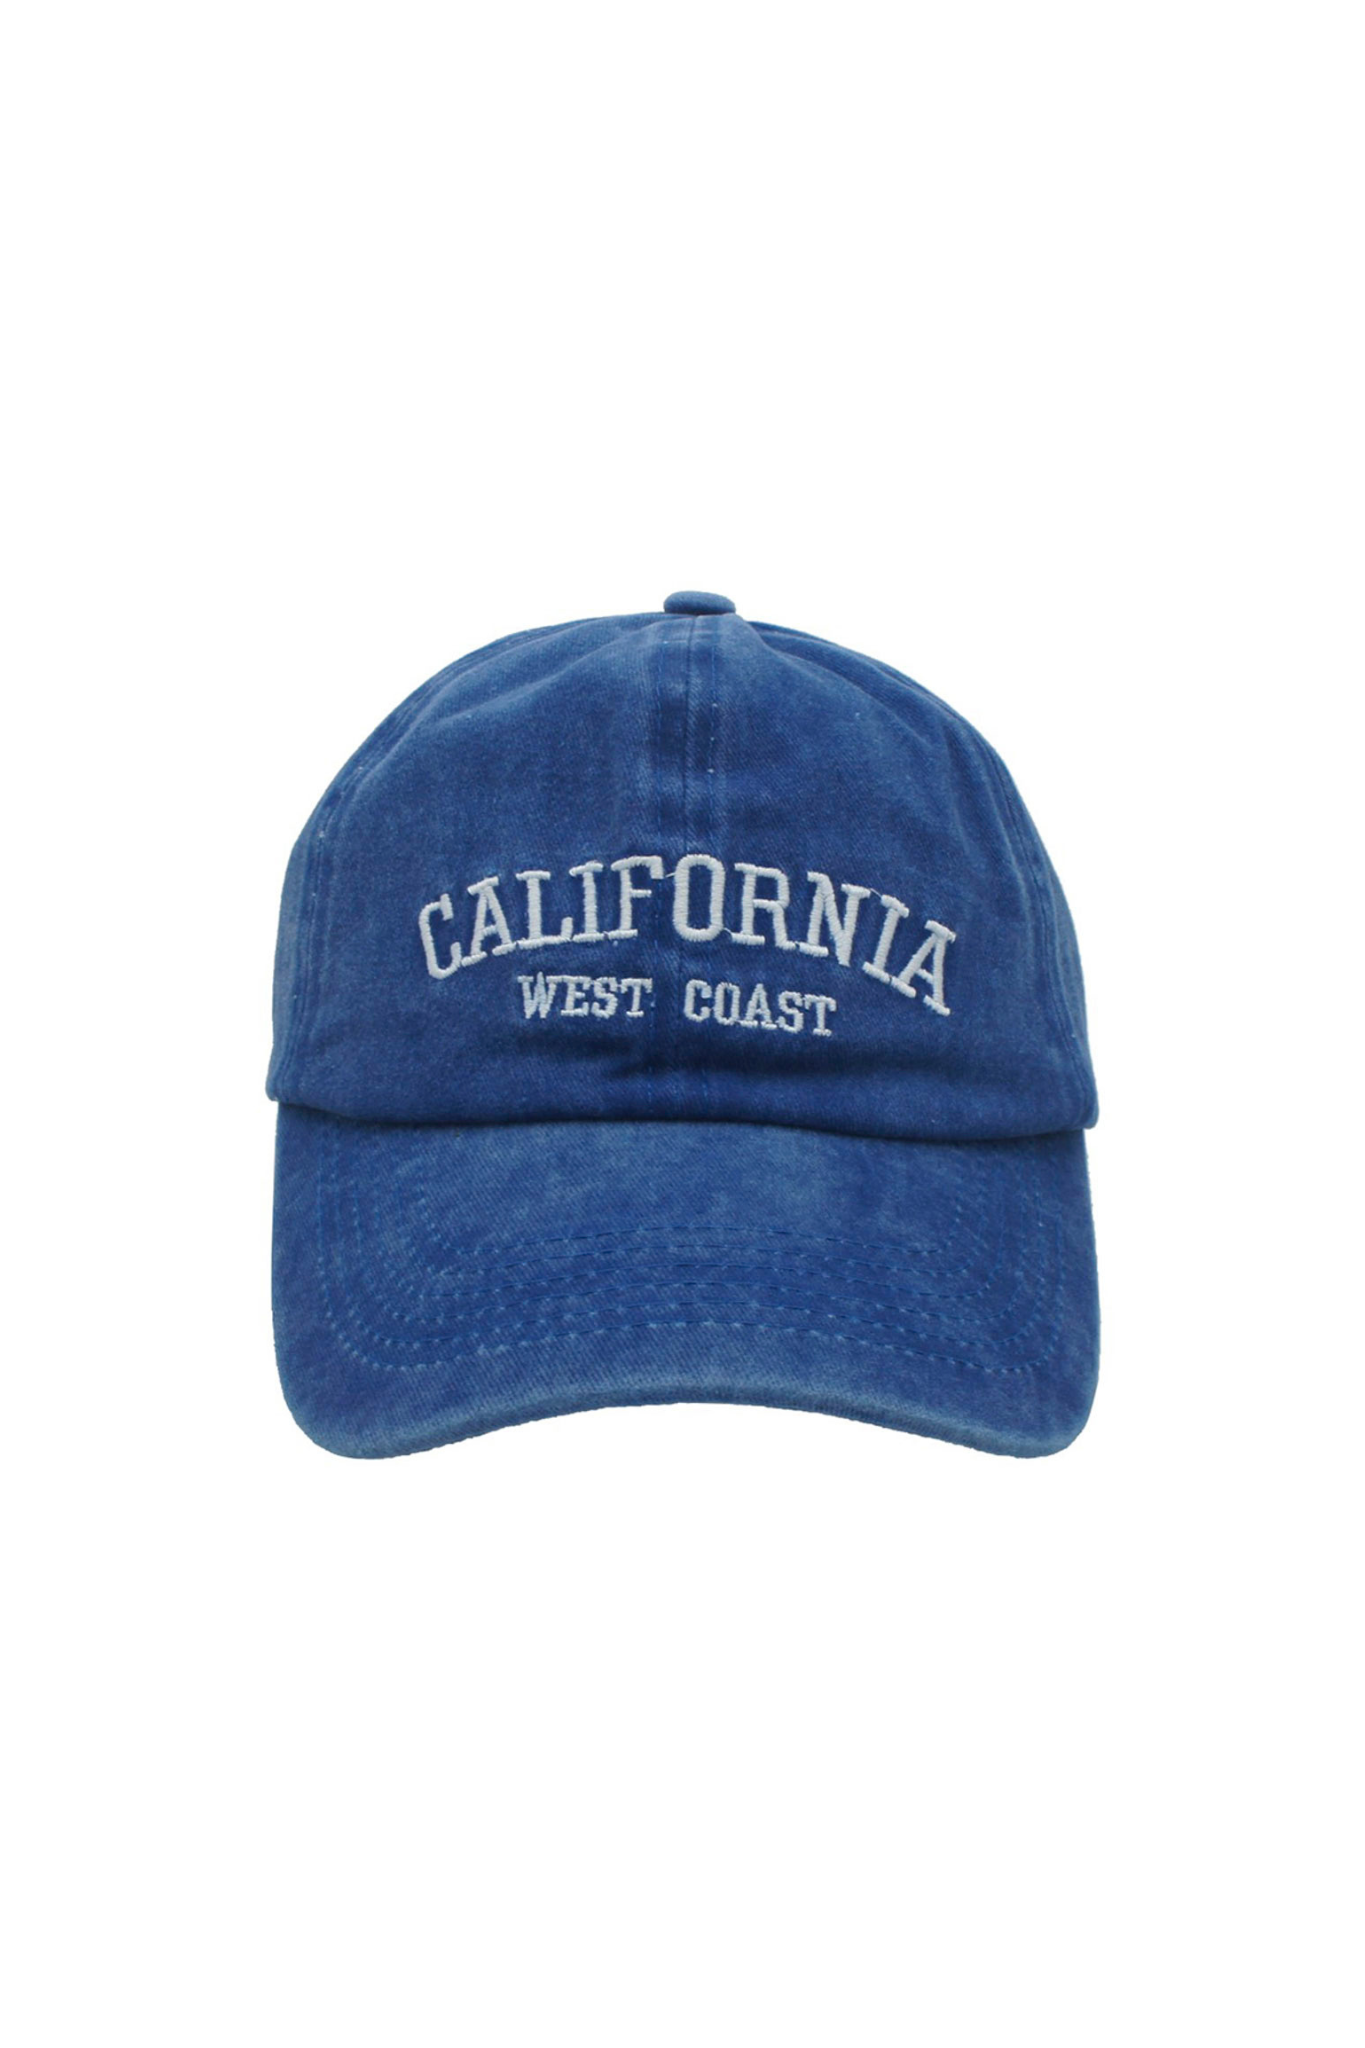 California West Coast Washed Cap in Royal Blue